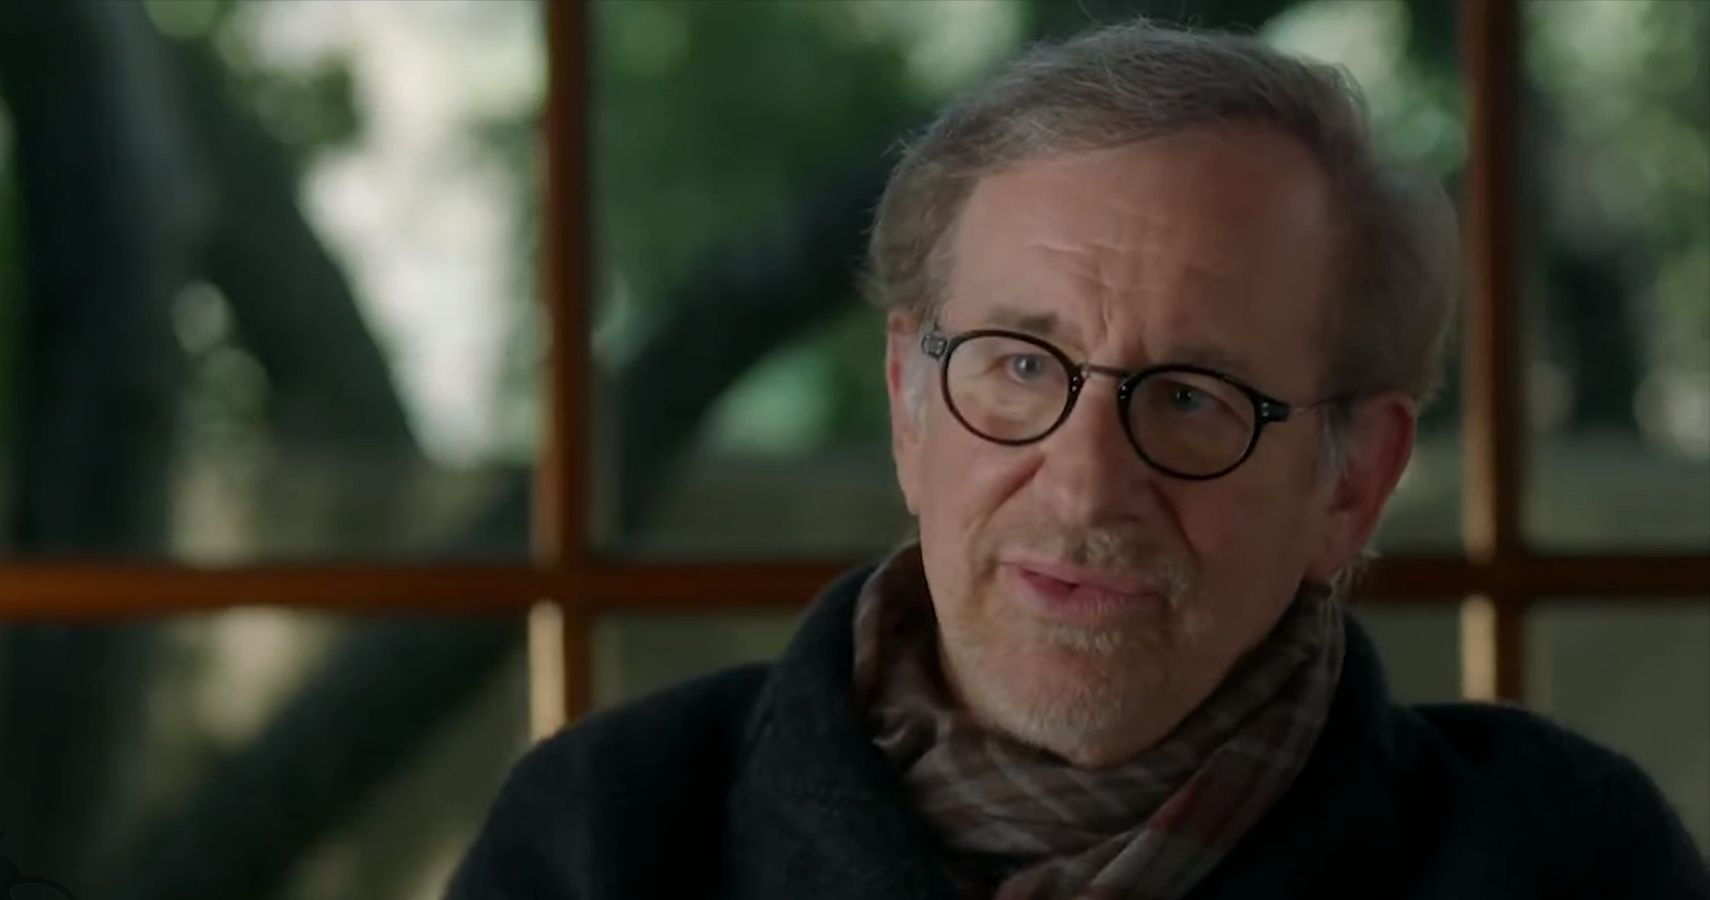 Steven Spielberg Is Writing And Directing A Movie Loosely Based On His Own Childhood